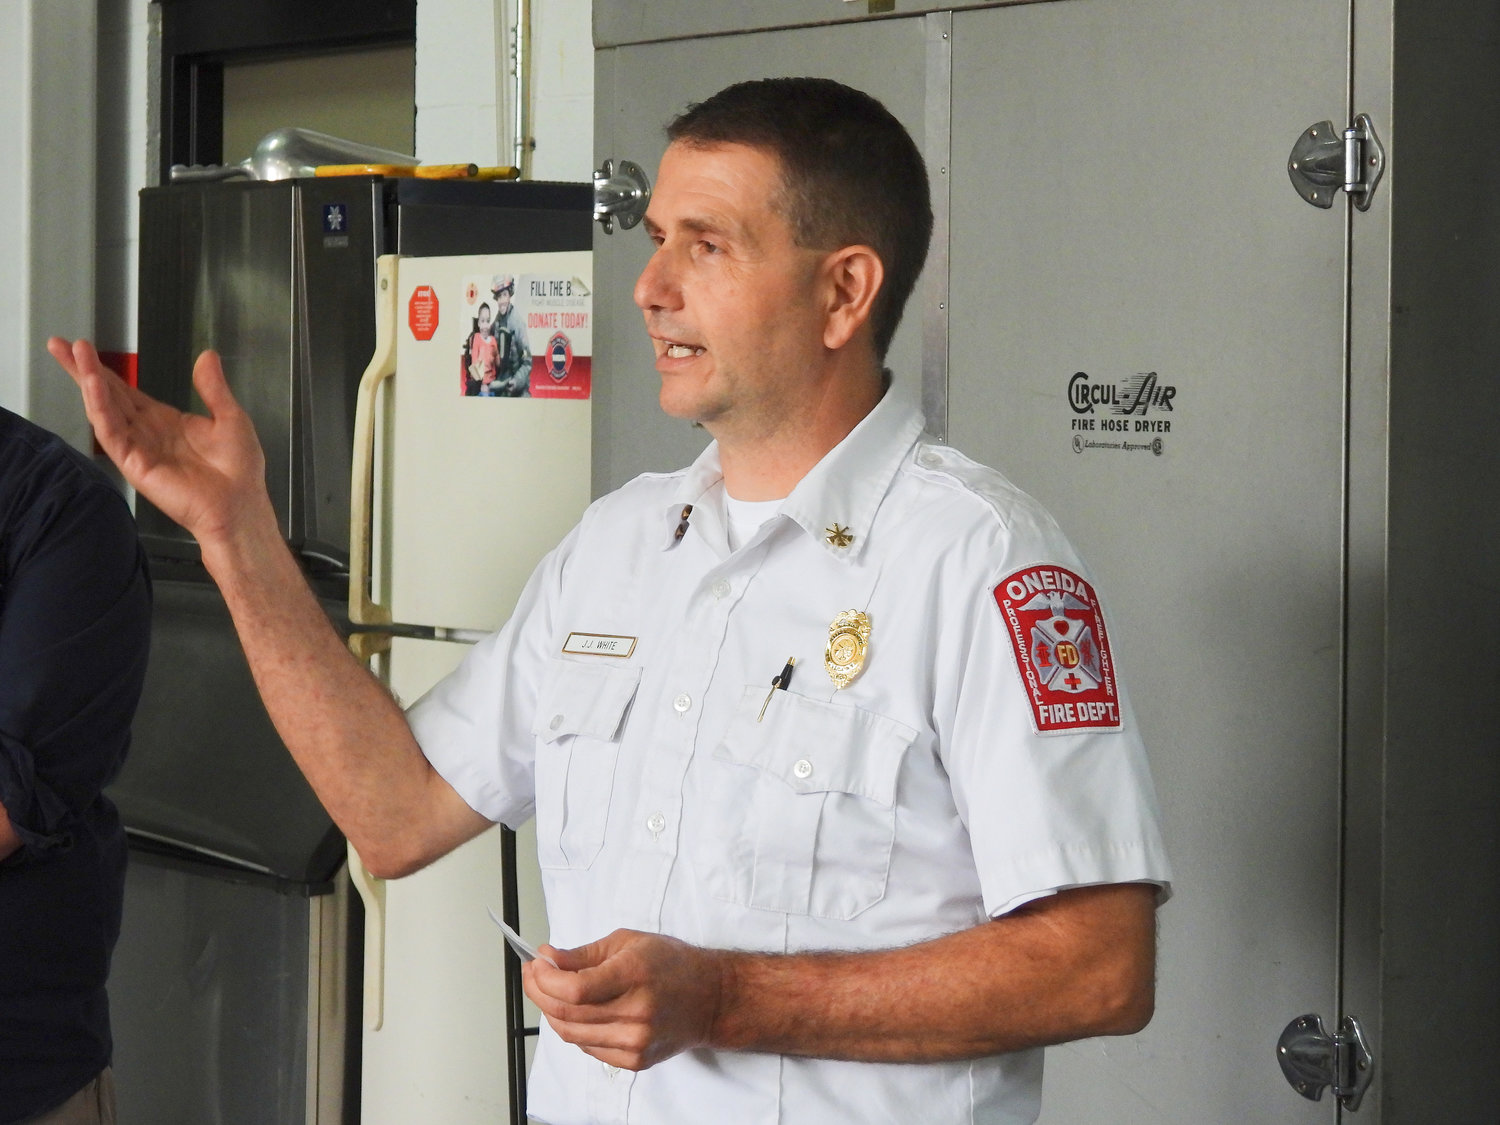 Deputy Chief Jeff White says goodbye to the Oneida Fire Department, officially retiring on Friday. White plans to spend more time with his family and working at his auto mechanic garage.